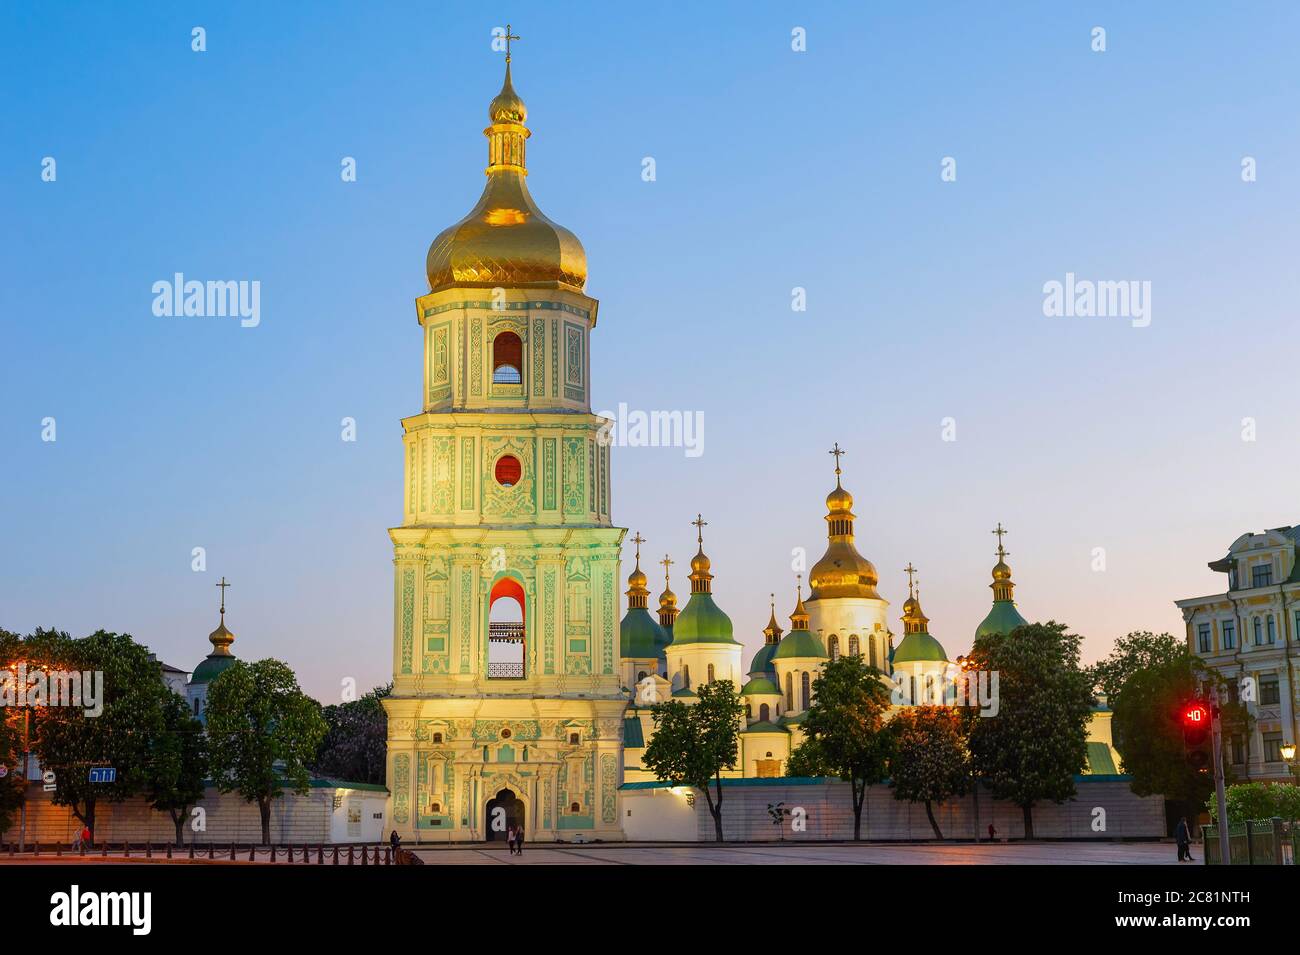 Saint Sophia's Cathedral with bell tower view at twilight, blooming chestnut trees and afterglow sky in background, Kyiv, Ukraine Stock Photo